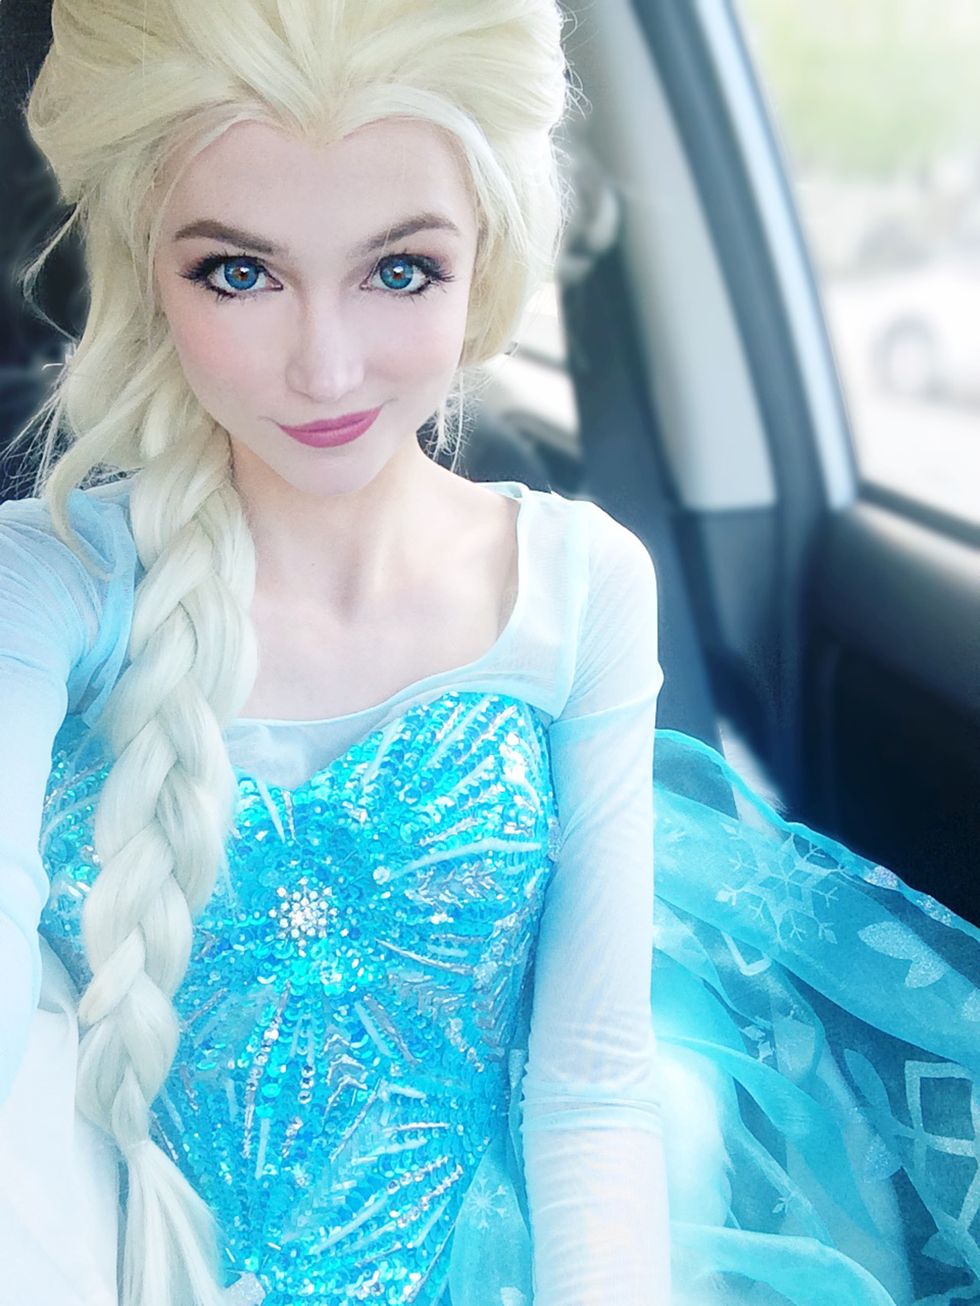 This 25-Year-Old Woman Paid $14,000 to Look Like Disney Princesses